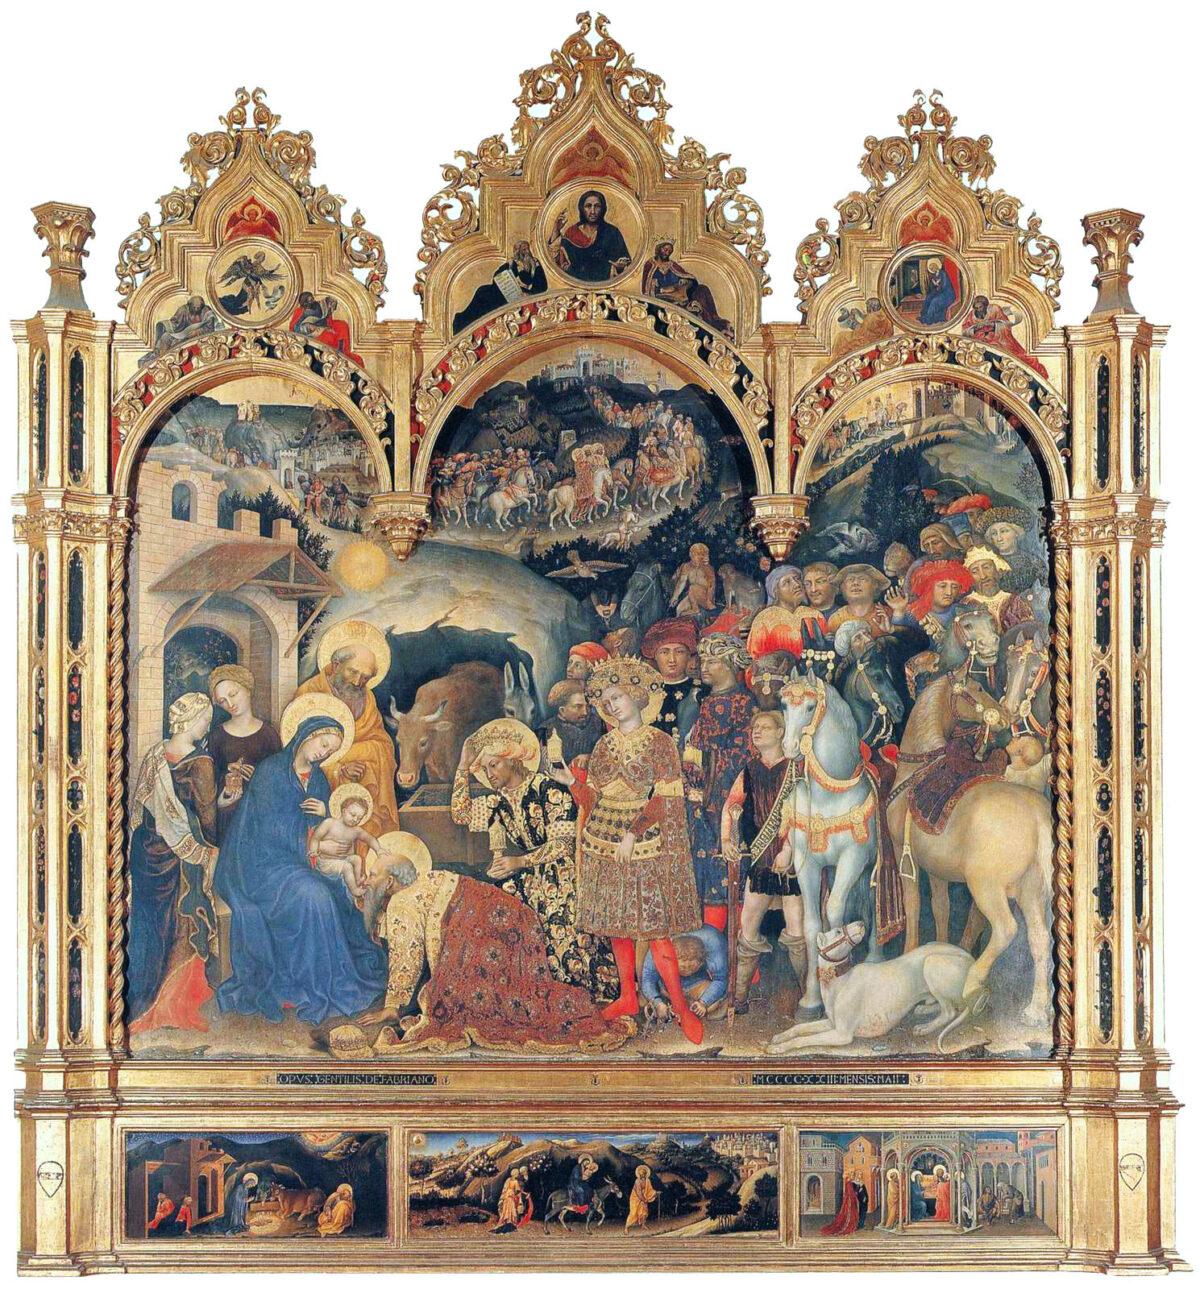 “The Adoration of the Magi” by Gentile da Fabriano. (US-PD)